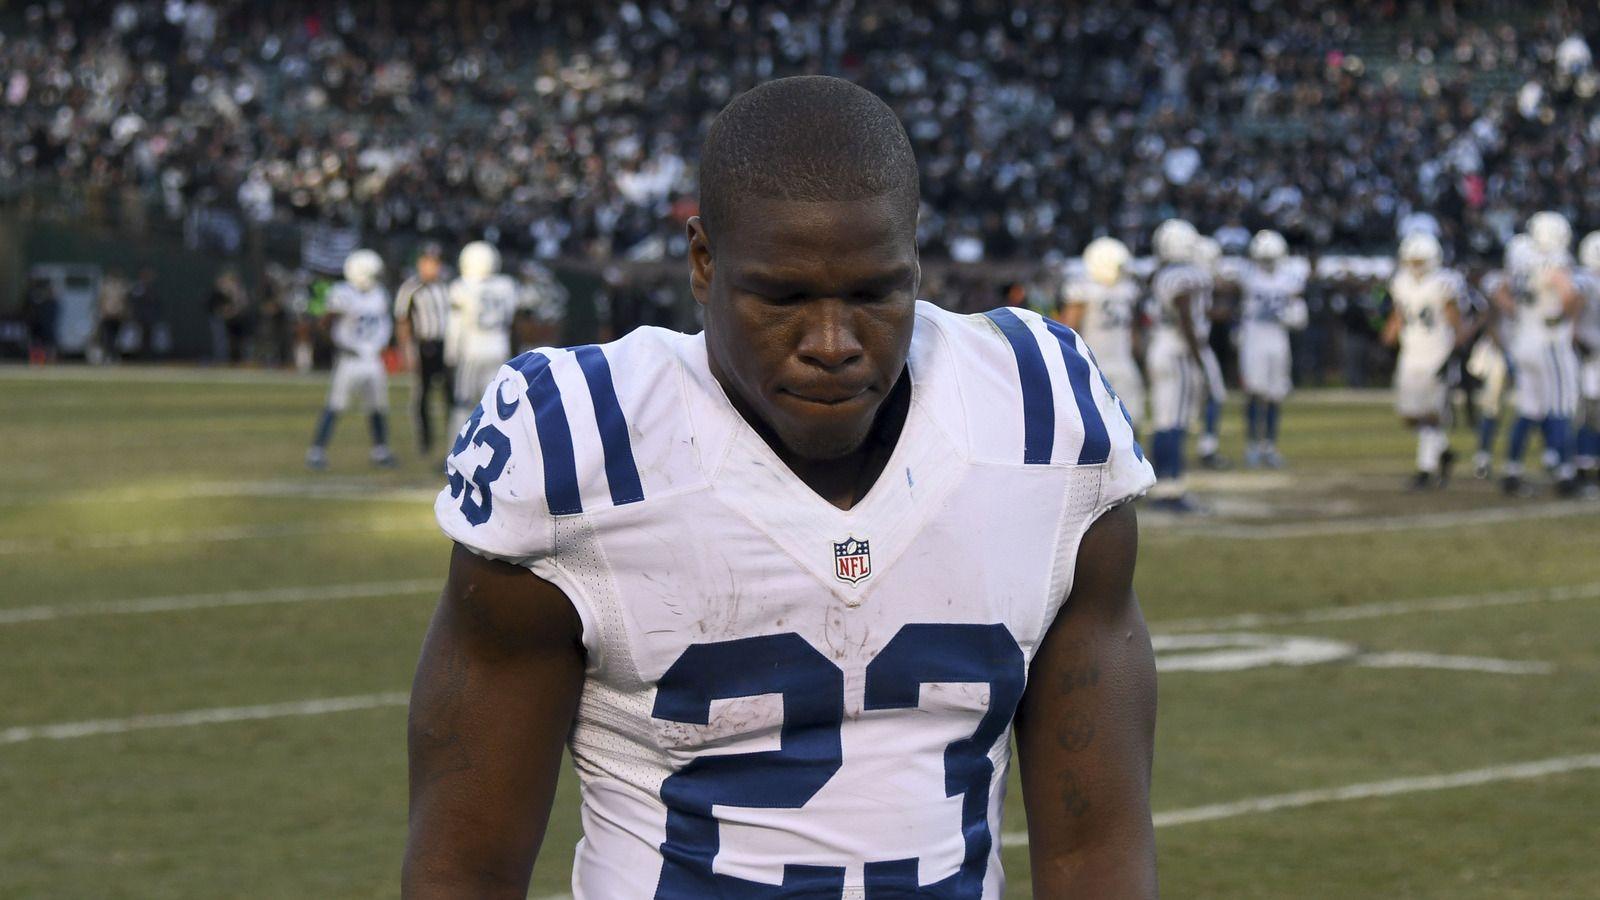 Frank Gore unhappy Colts have been 'going backwards'